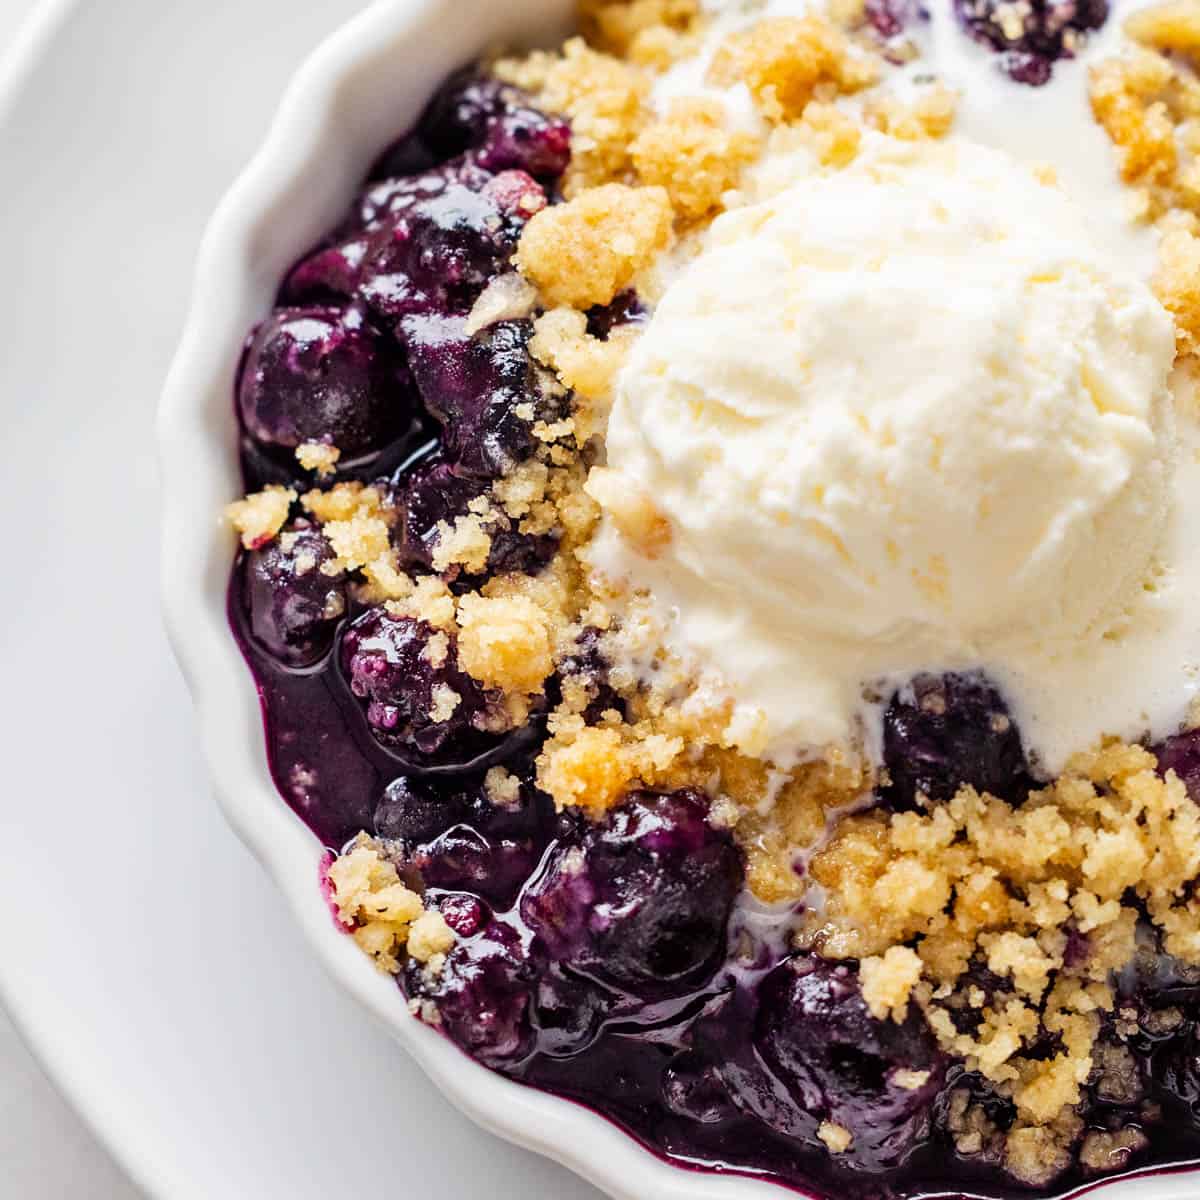 Blueberry crumble.